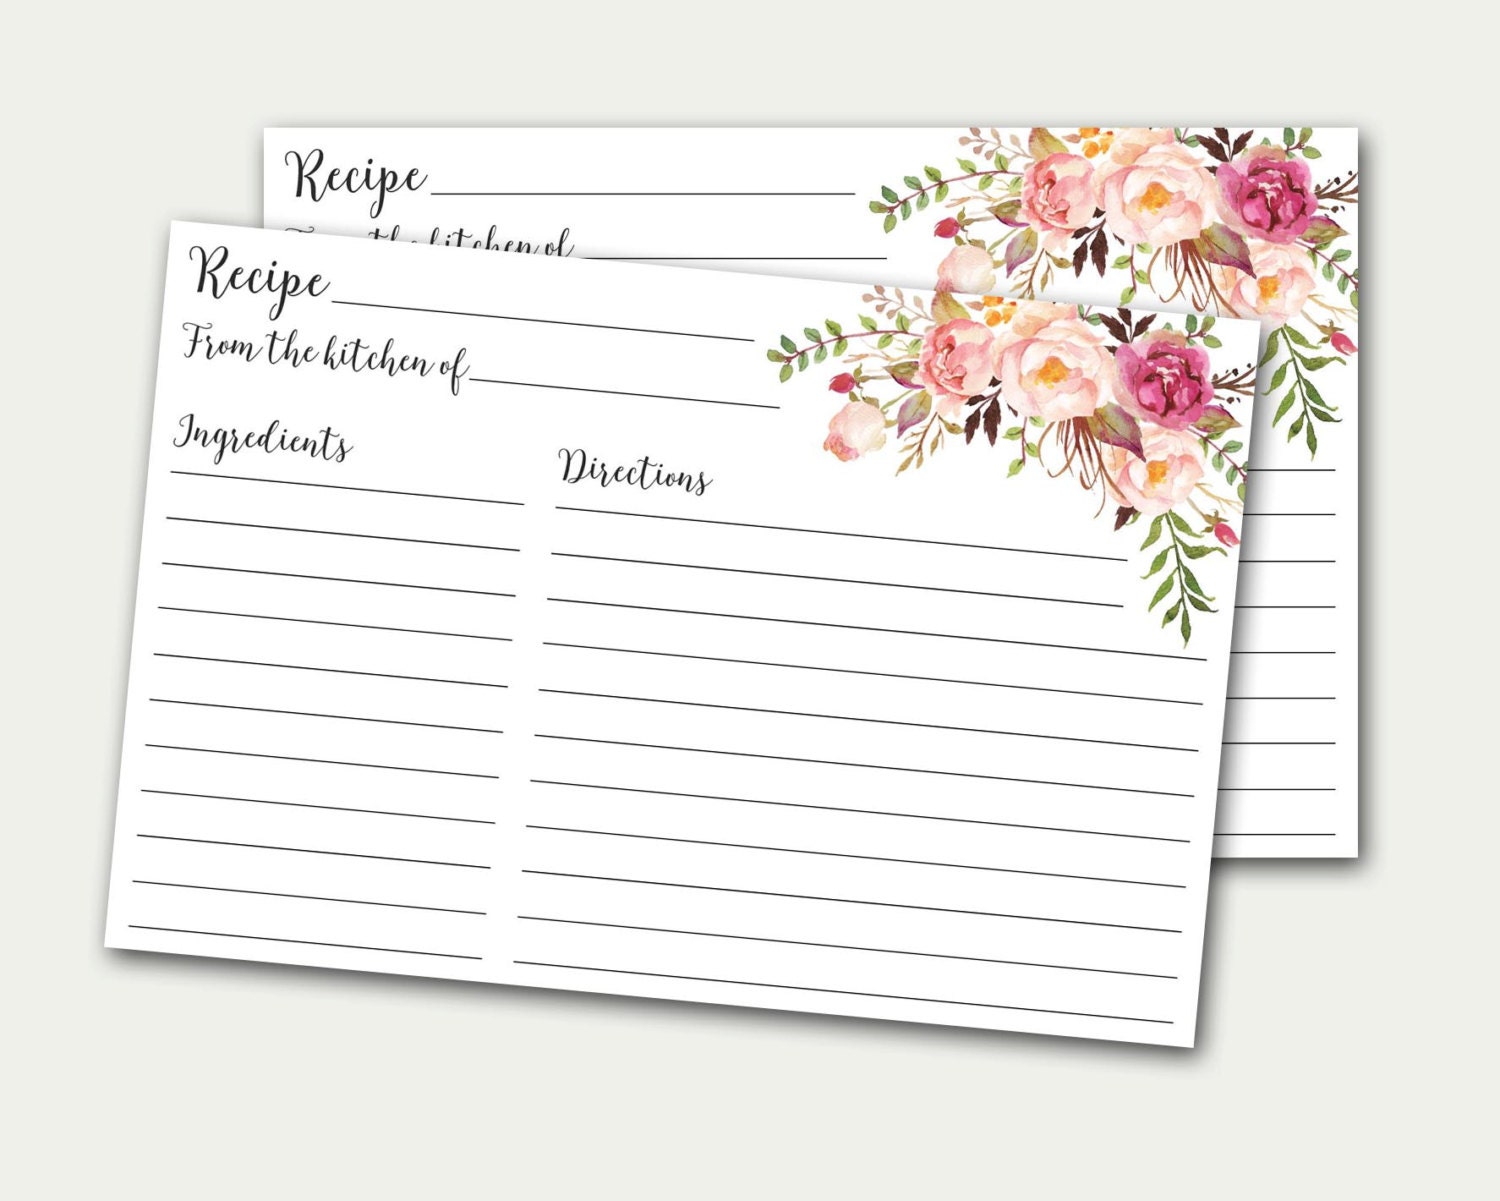 Printable Recipe Cards For Bridal Shower